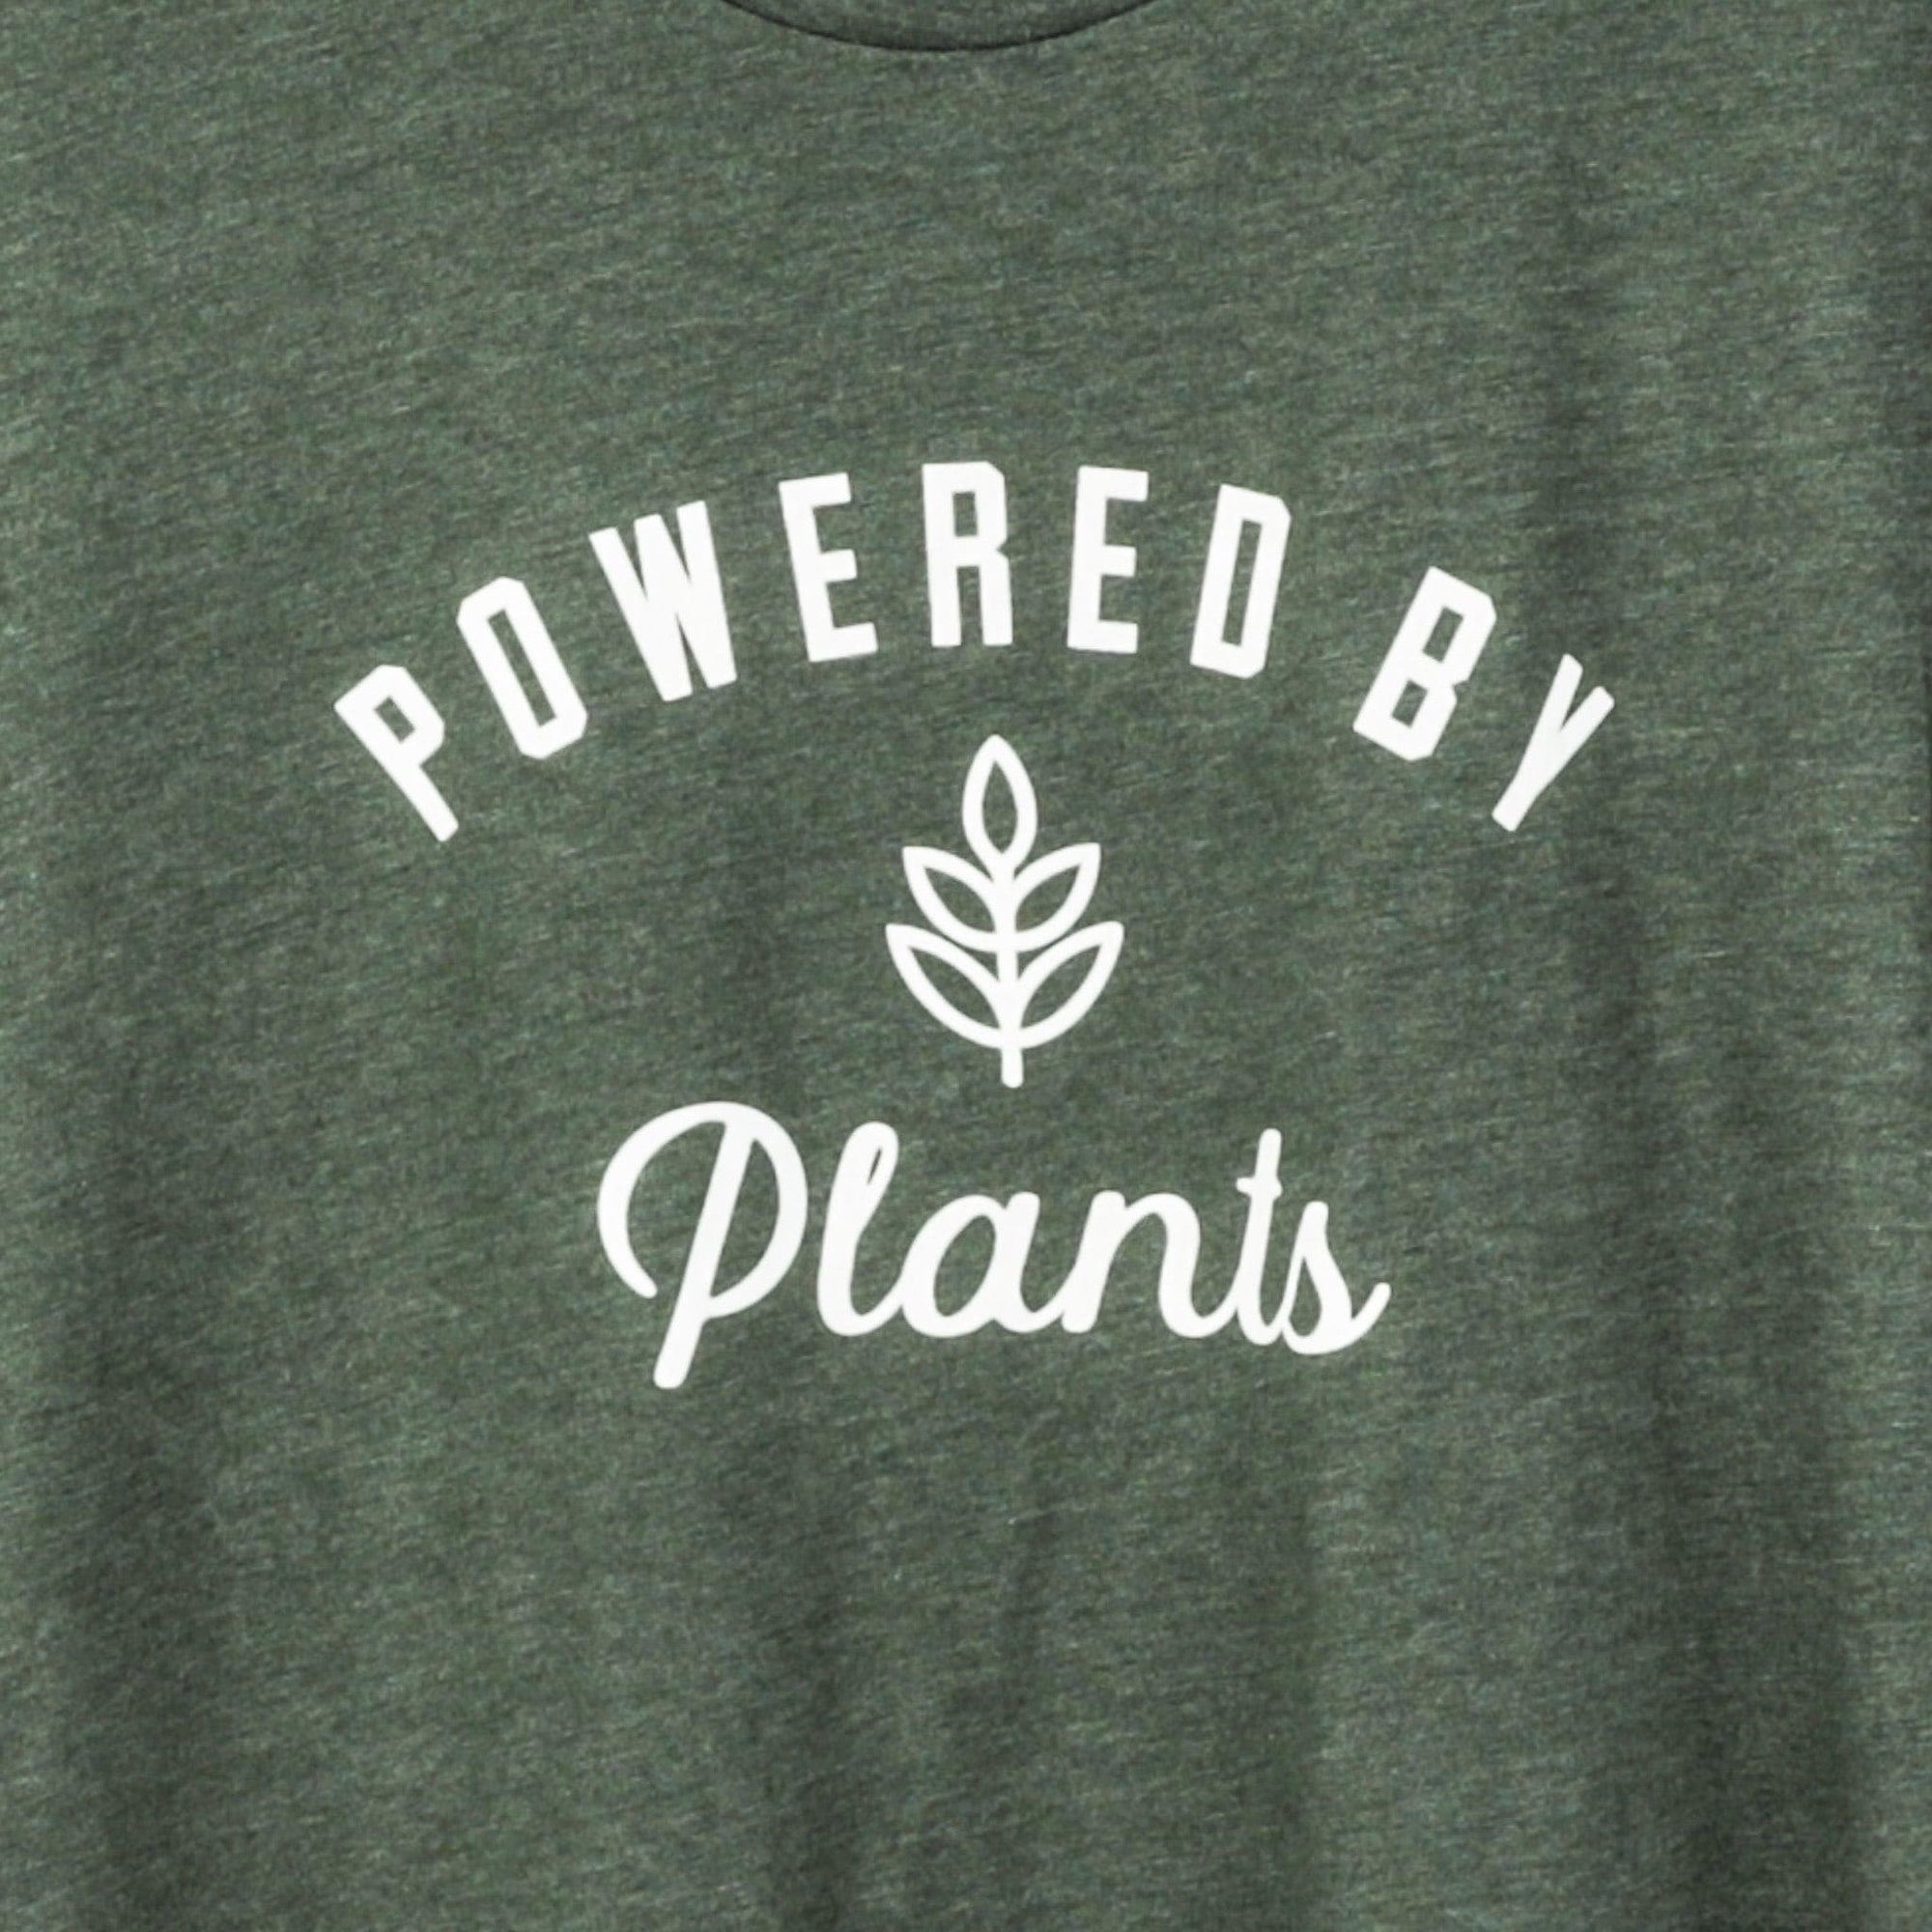 Powered By Plants T-Shirt - Green Fresh Florals + Plants